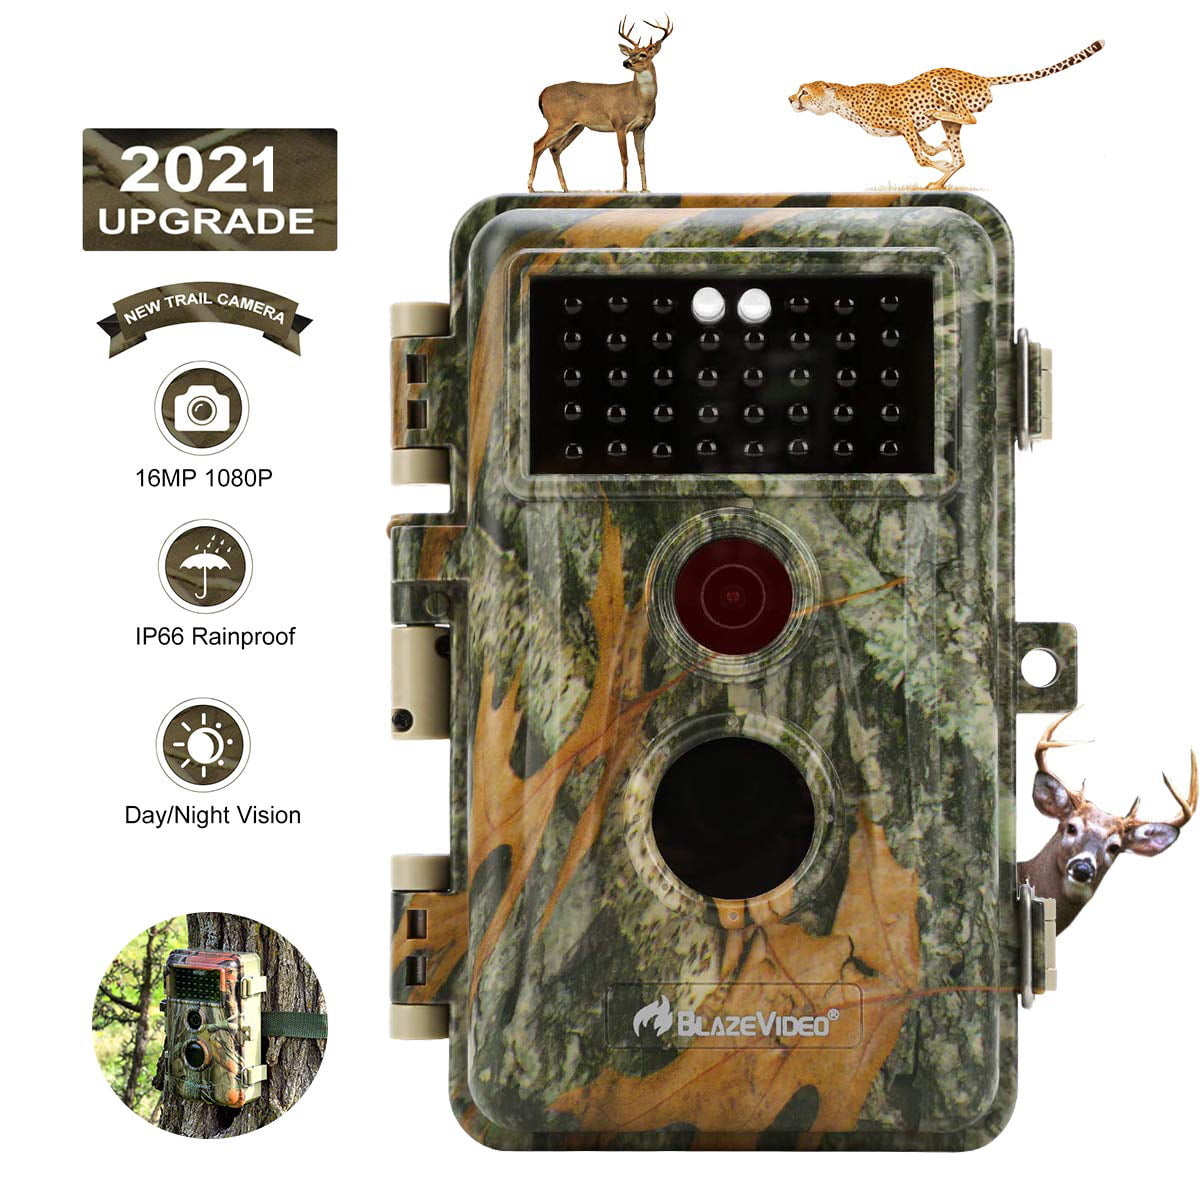 2-Pack Game Trail Deer Cameras 20MP HD 1080P H.264 MP4 Video 2021 Upgrade 